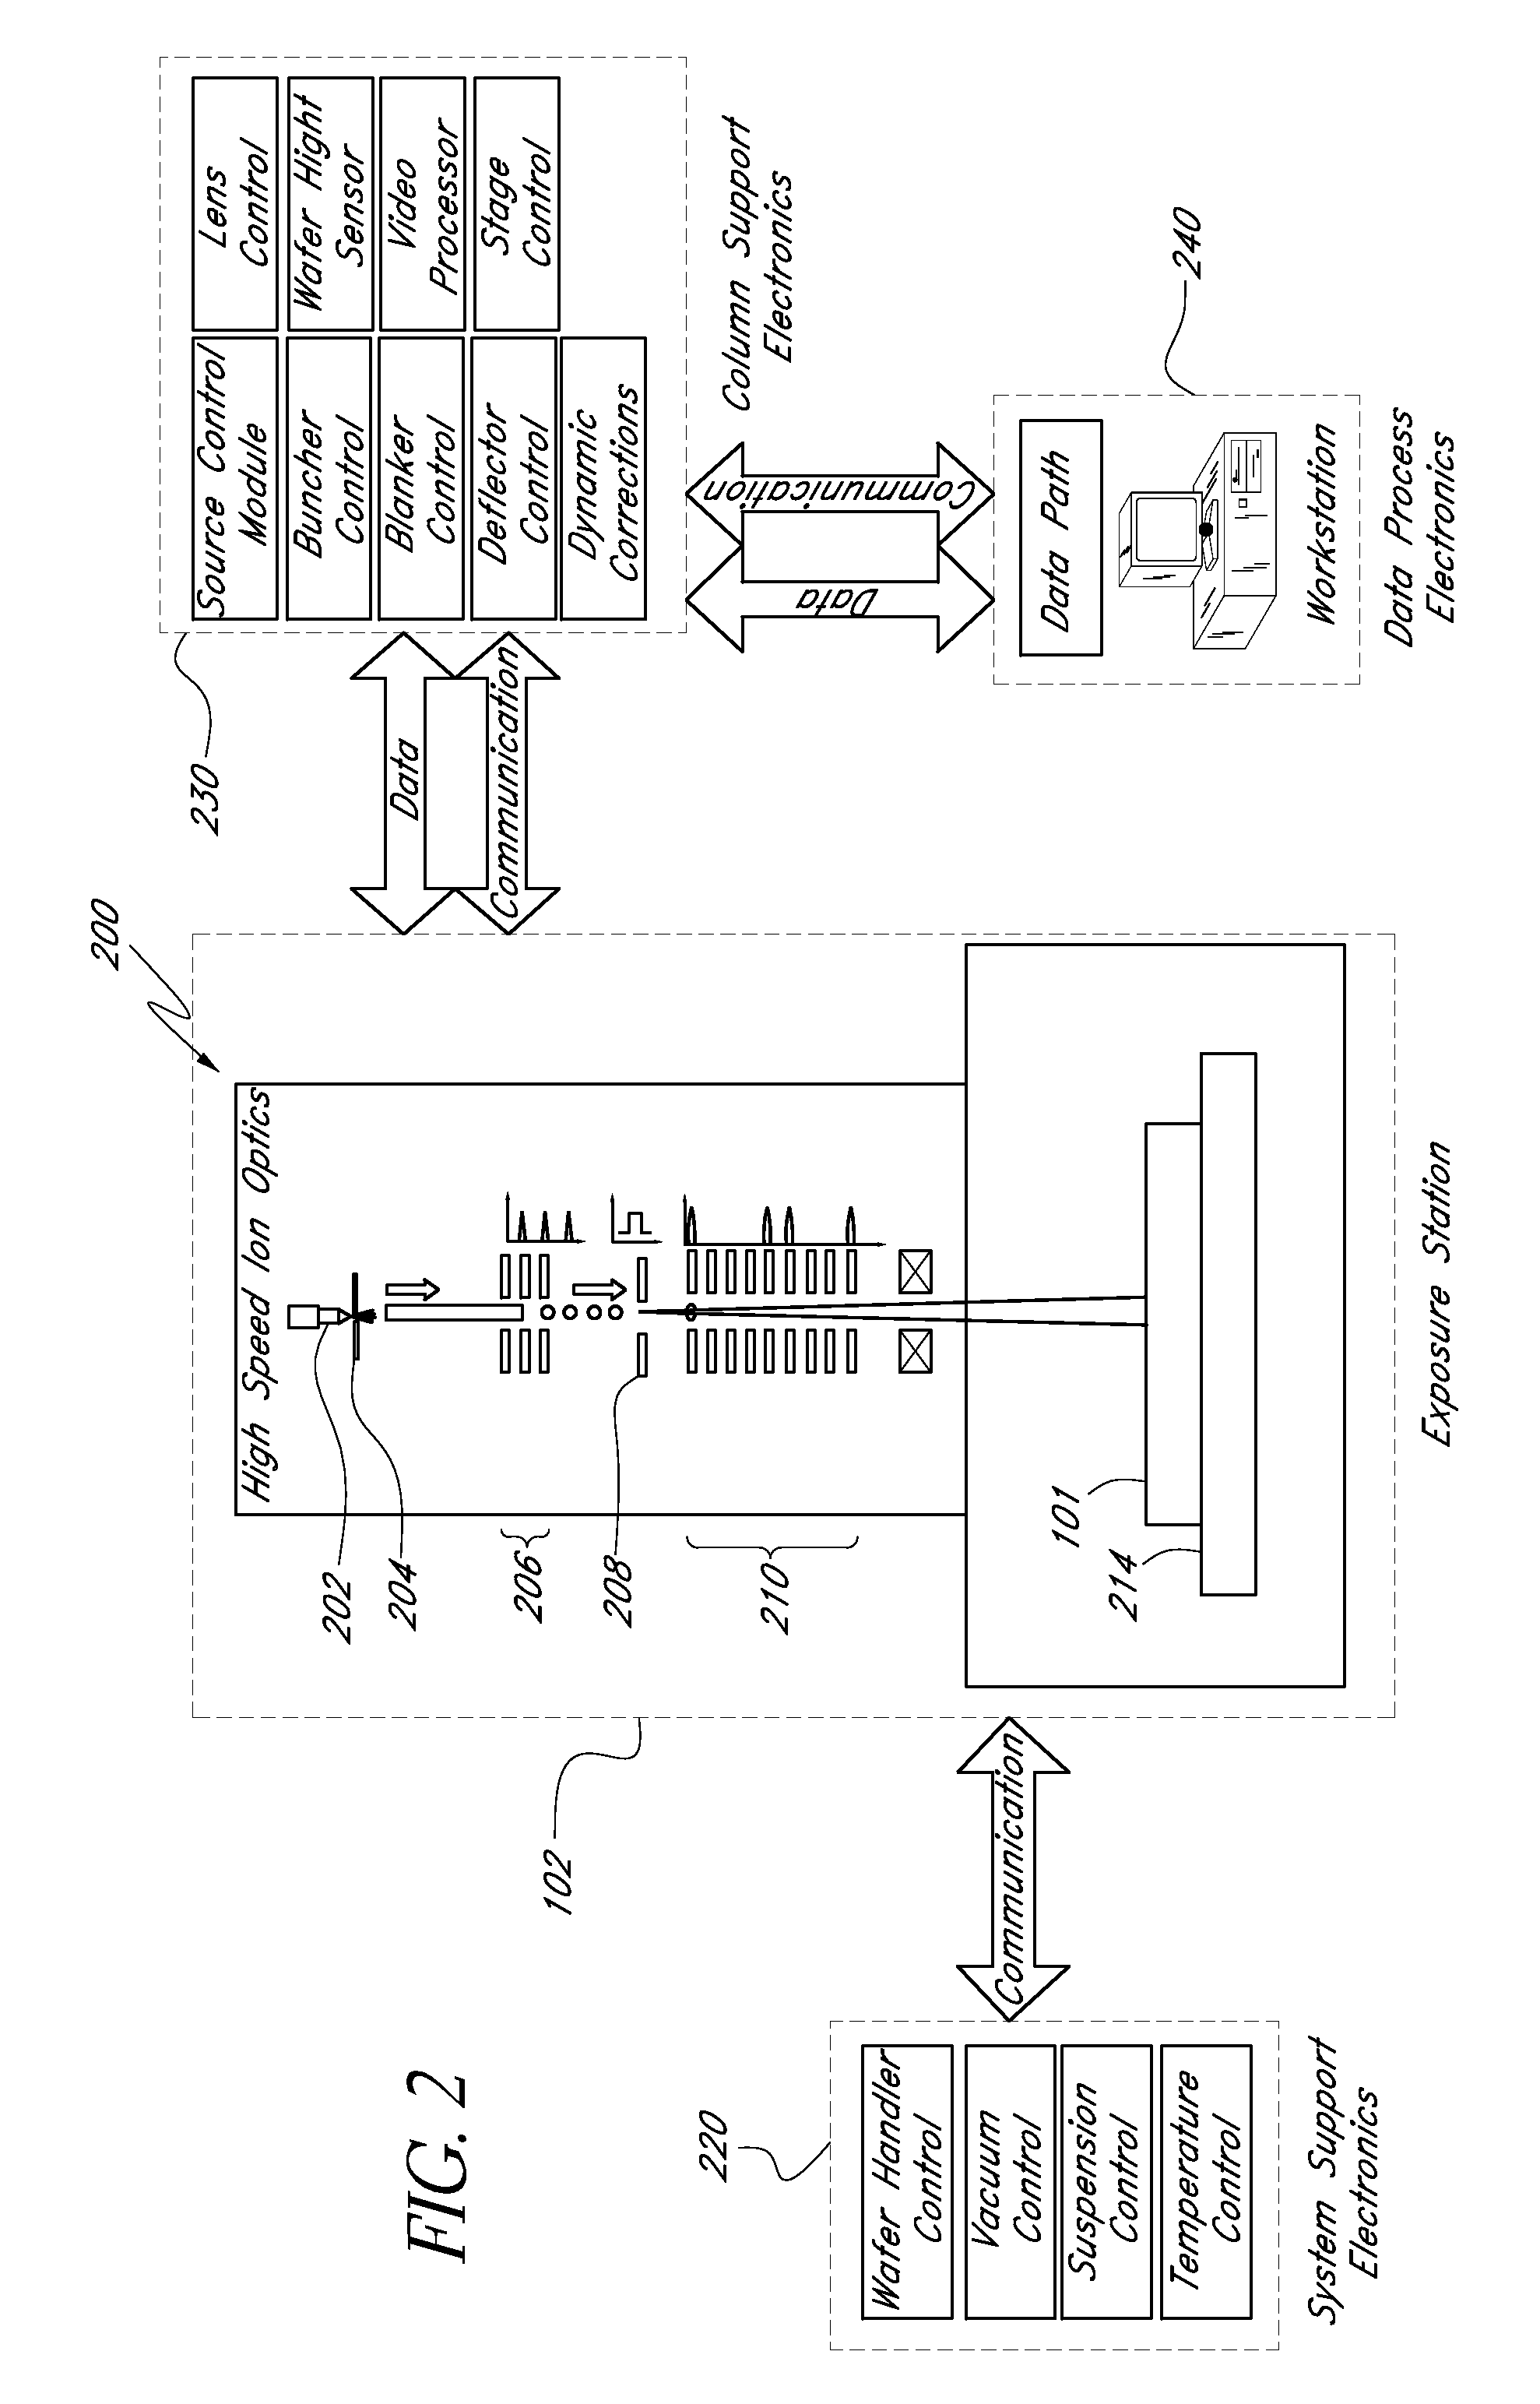 Apparatus and method for conformal mask manufacturing